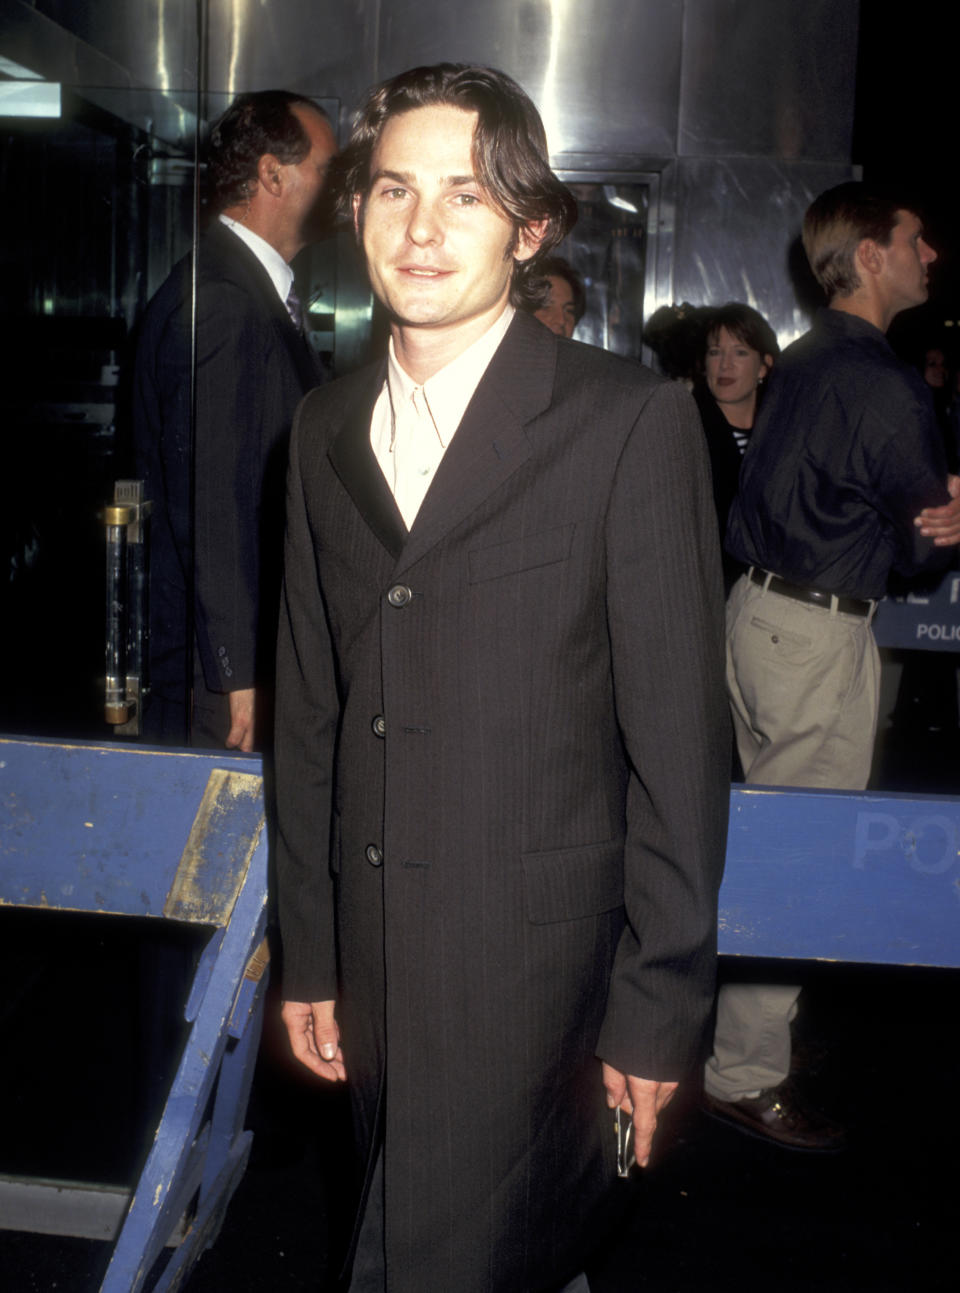 Actor Henry Thomas attends the 'Strange Days' New York City Premiere on October 7, 1995 at Alice Tully Hall, Lincoln Center in New York City, New York. (Photo by Ron Galella, Ltd./Ron Galella Collection via Getty Images)